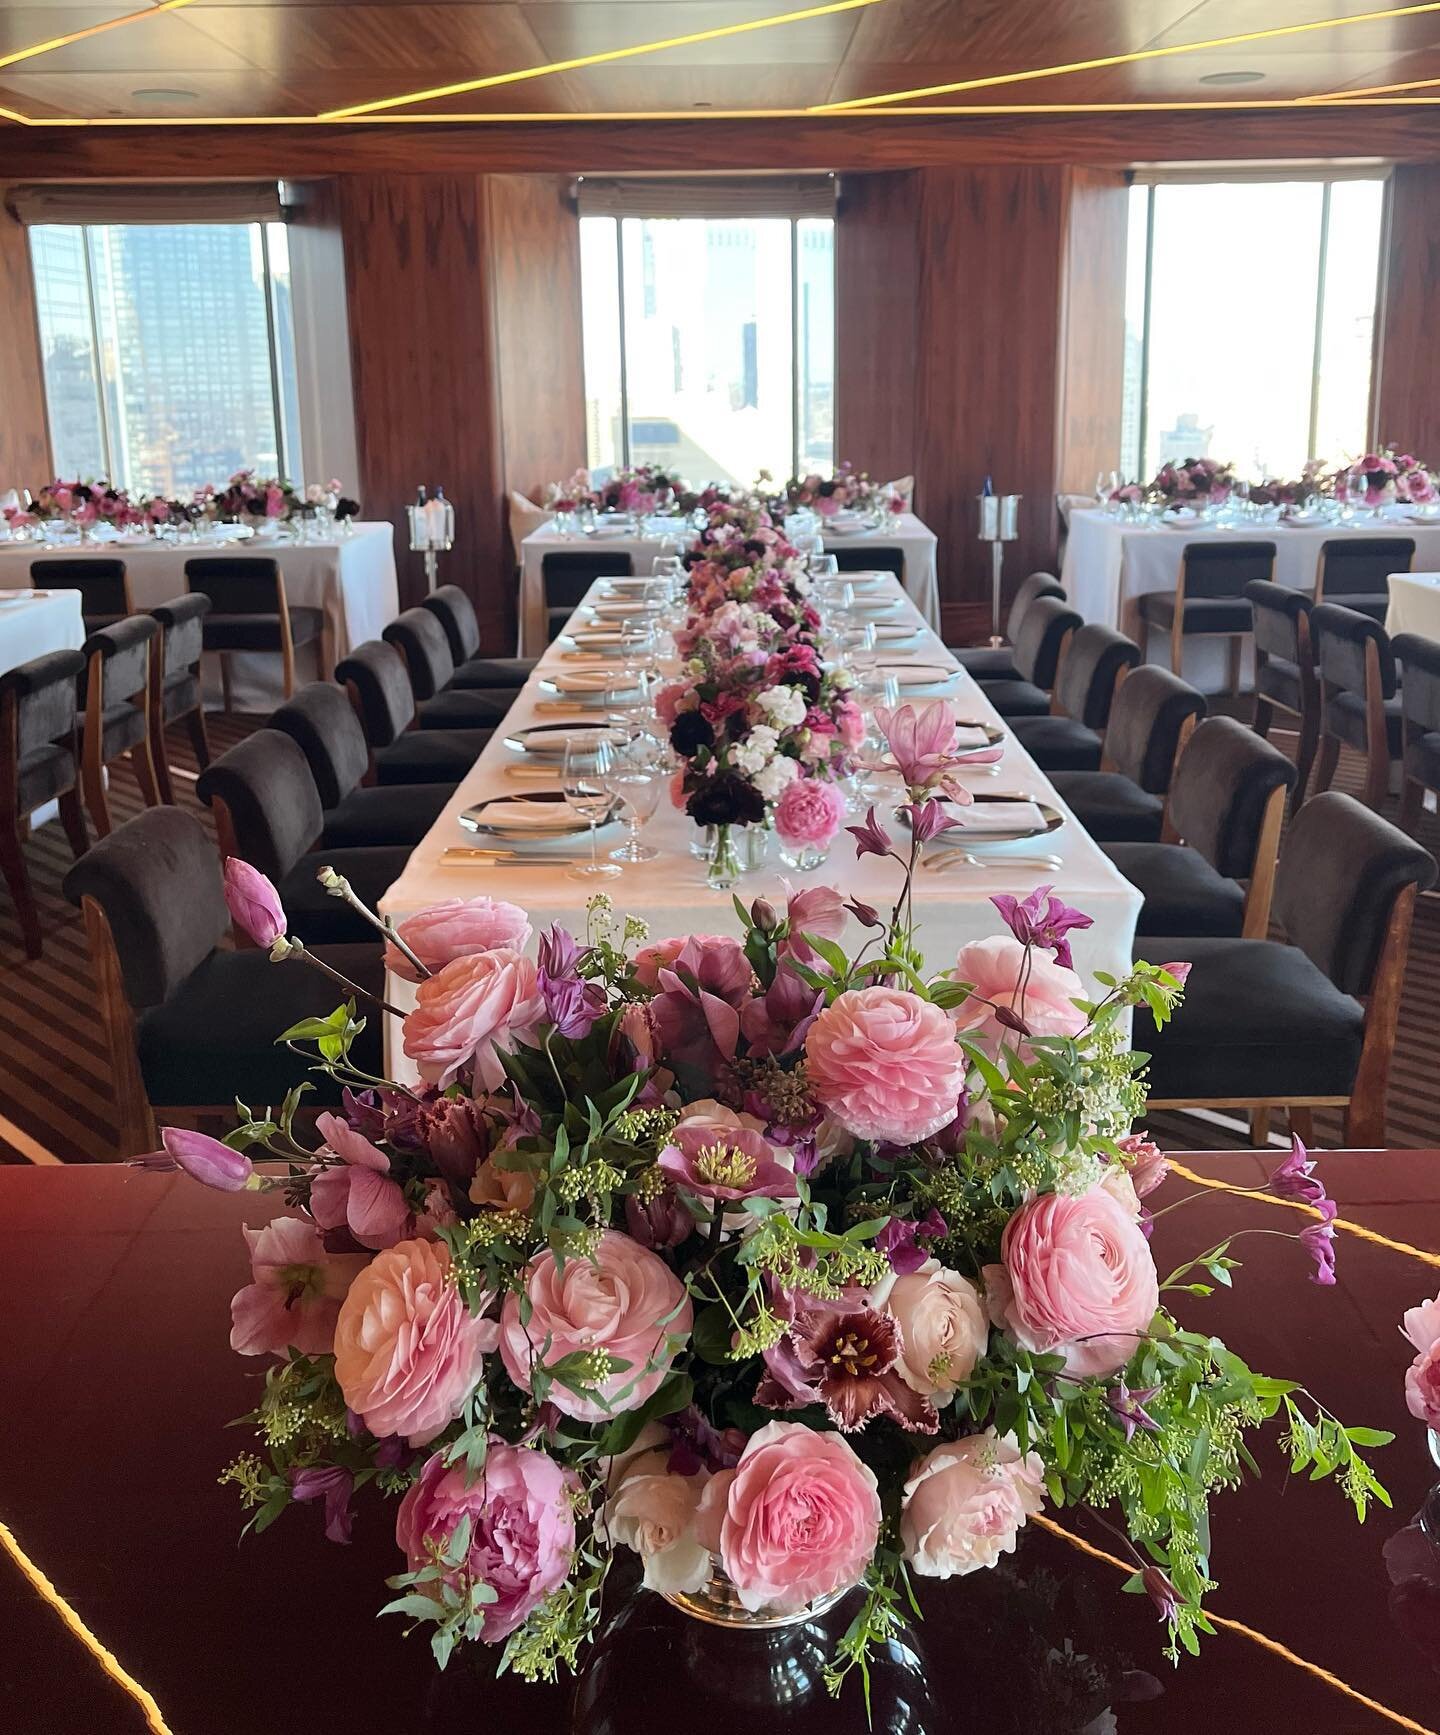 We found love on the 37th floor this Valentine&rsquo;s Day!

#roomwithaview #tablewithaview #views #valentines #perfectlypink #romance #eventdesign #flowers #tablescape